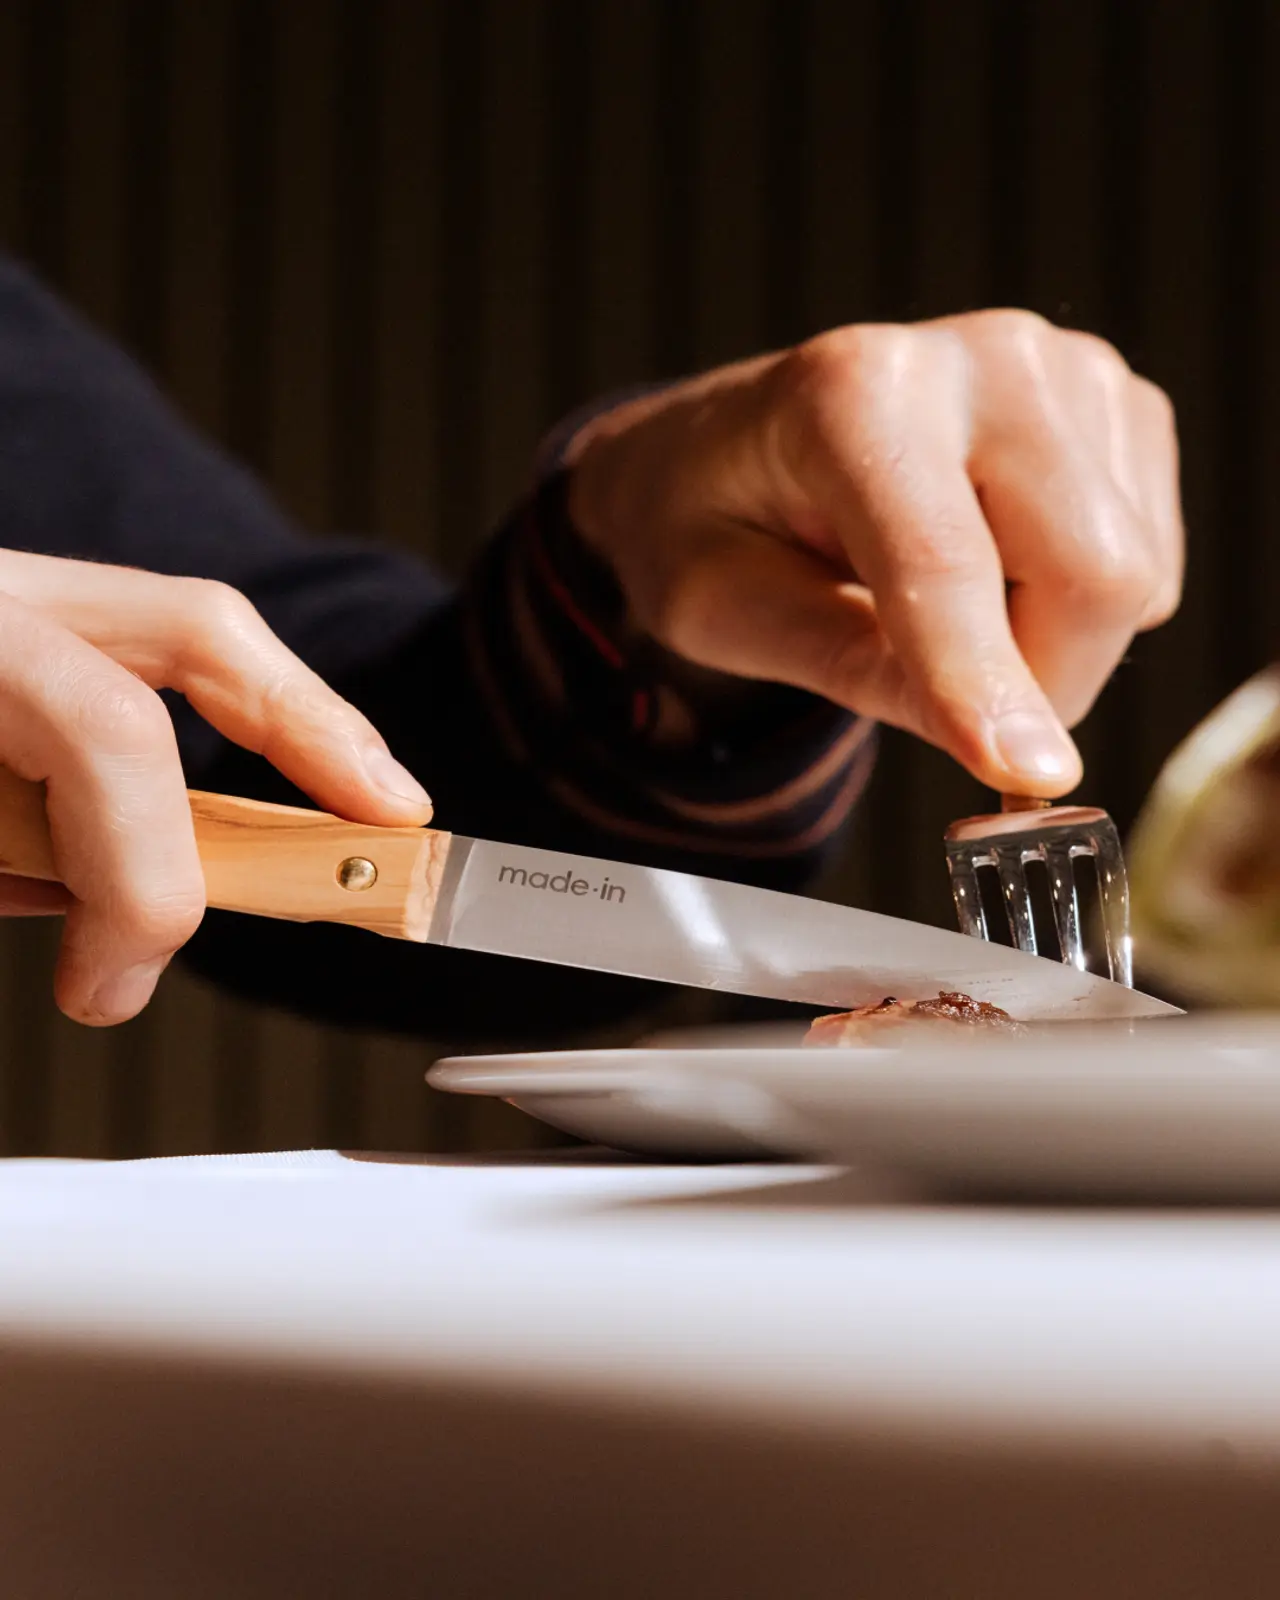 Close-up of a person's hands using a fork and knife to cut meat on a plate at a dining table.